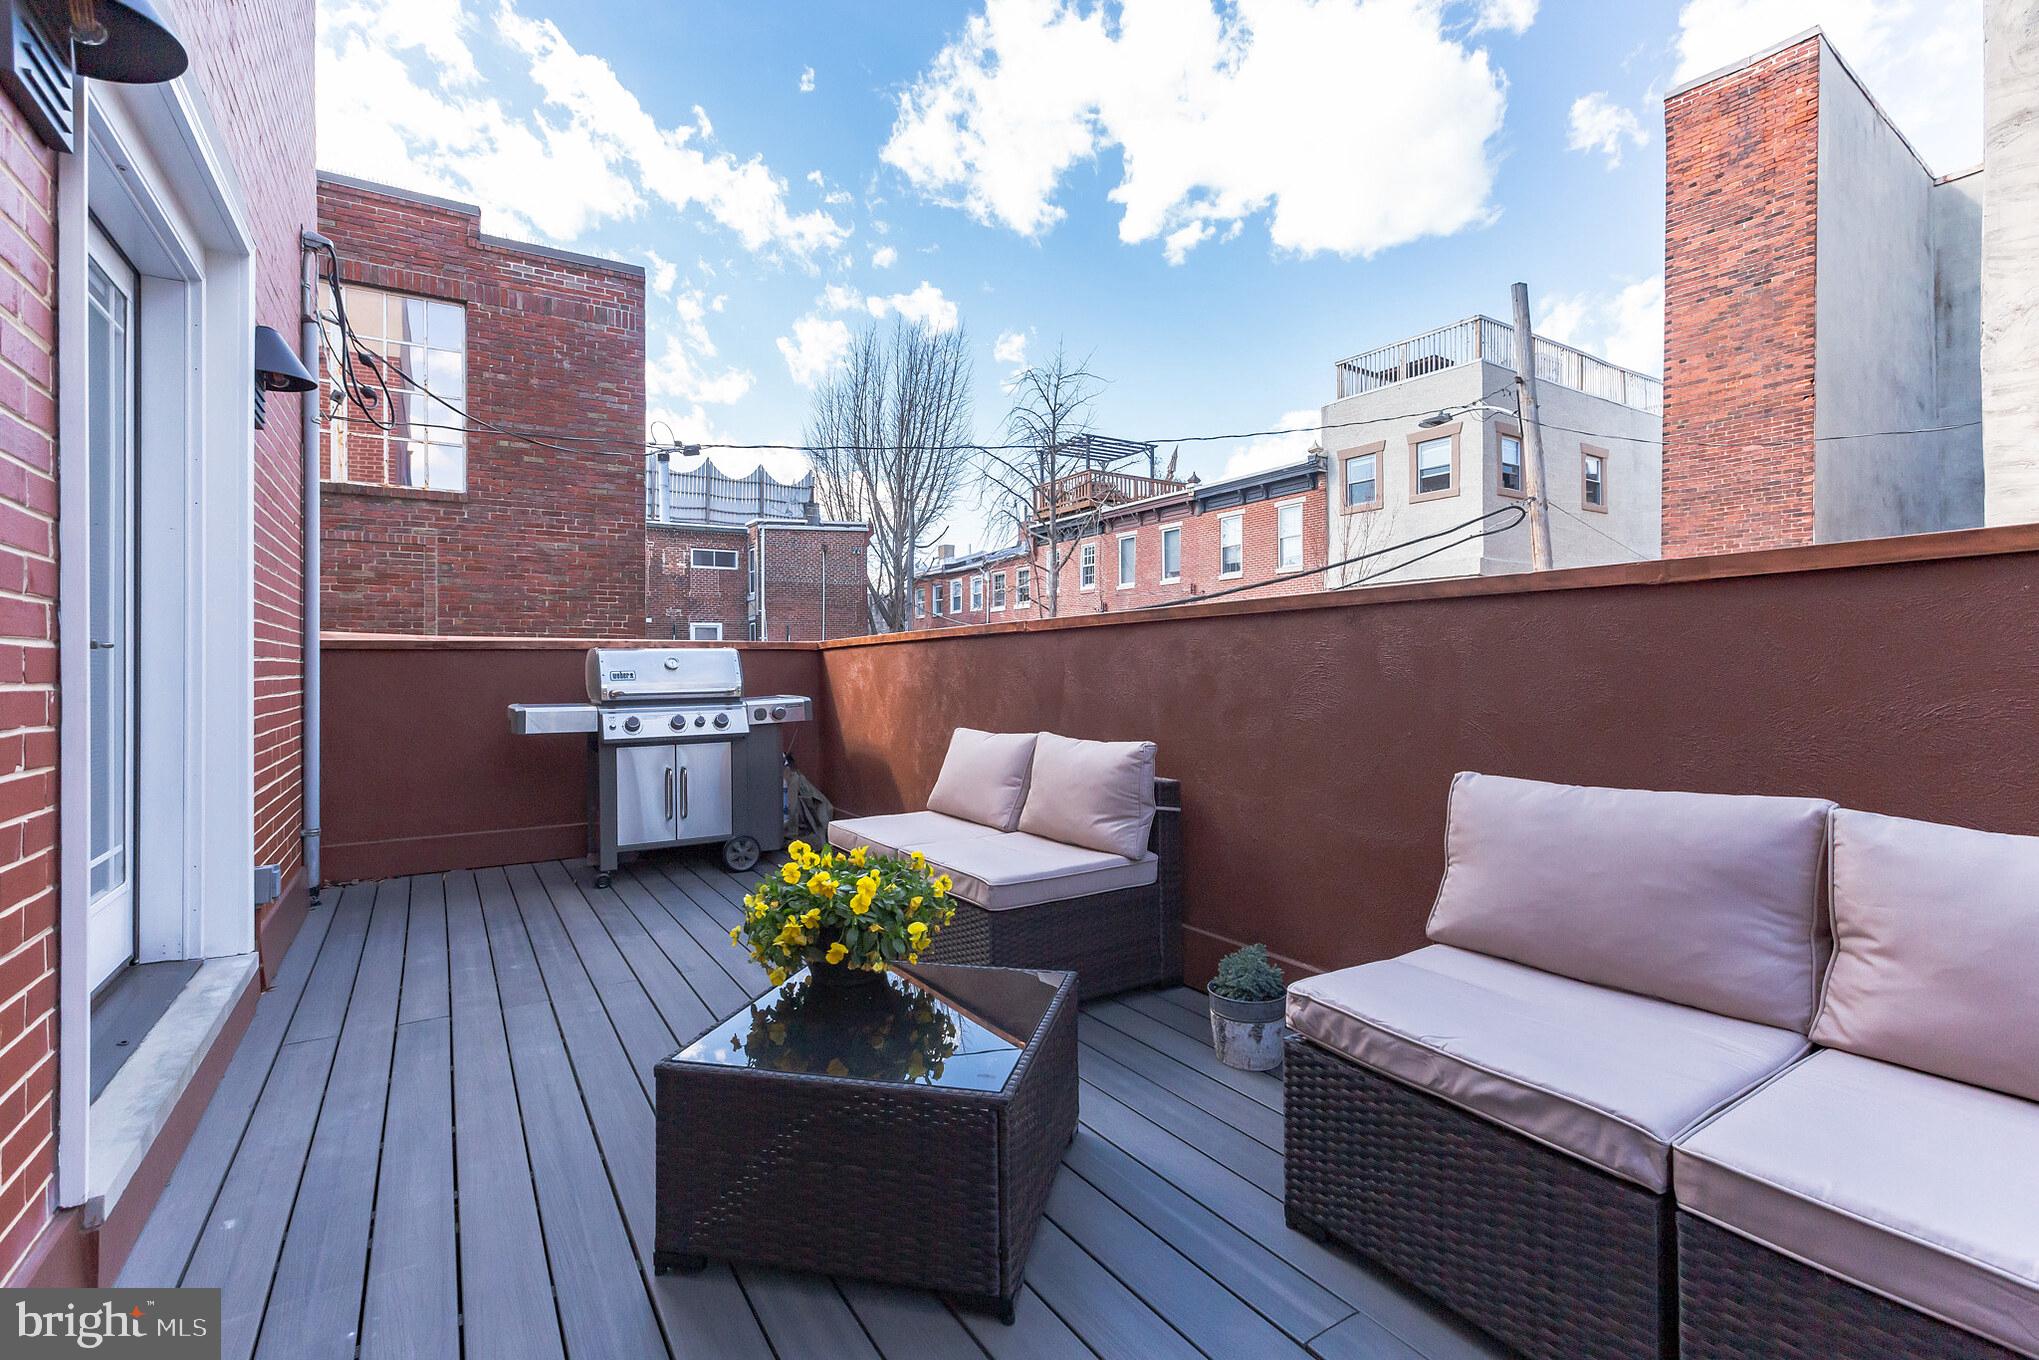 a view of a rooftop deck with couch and chairs